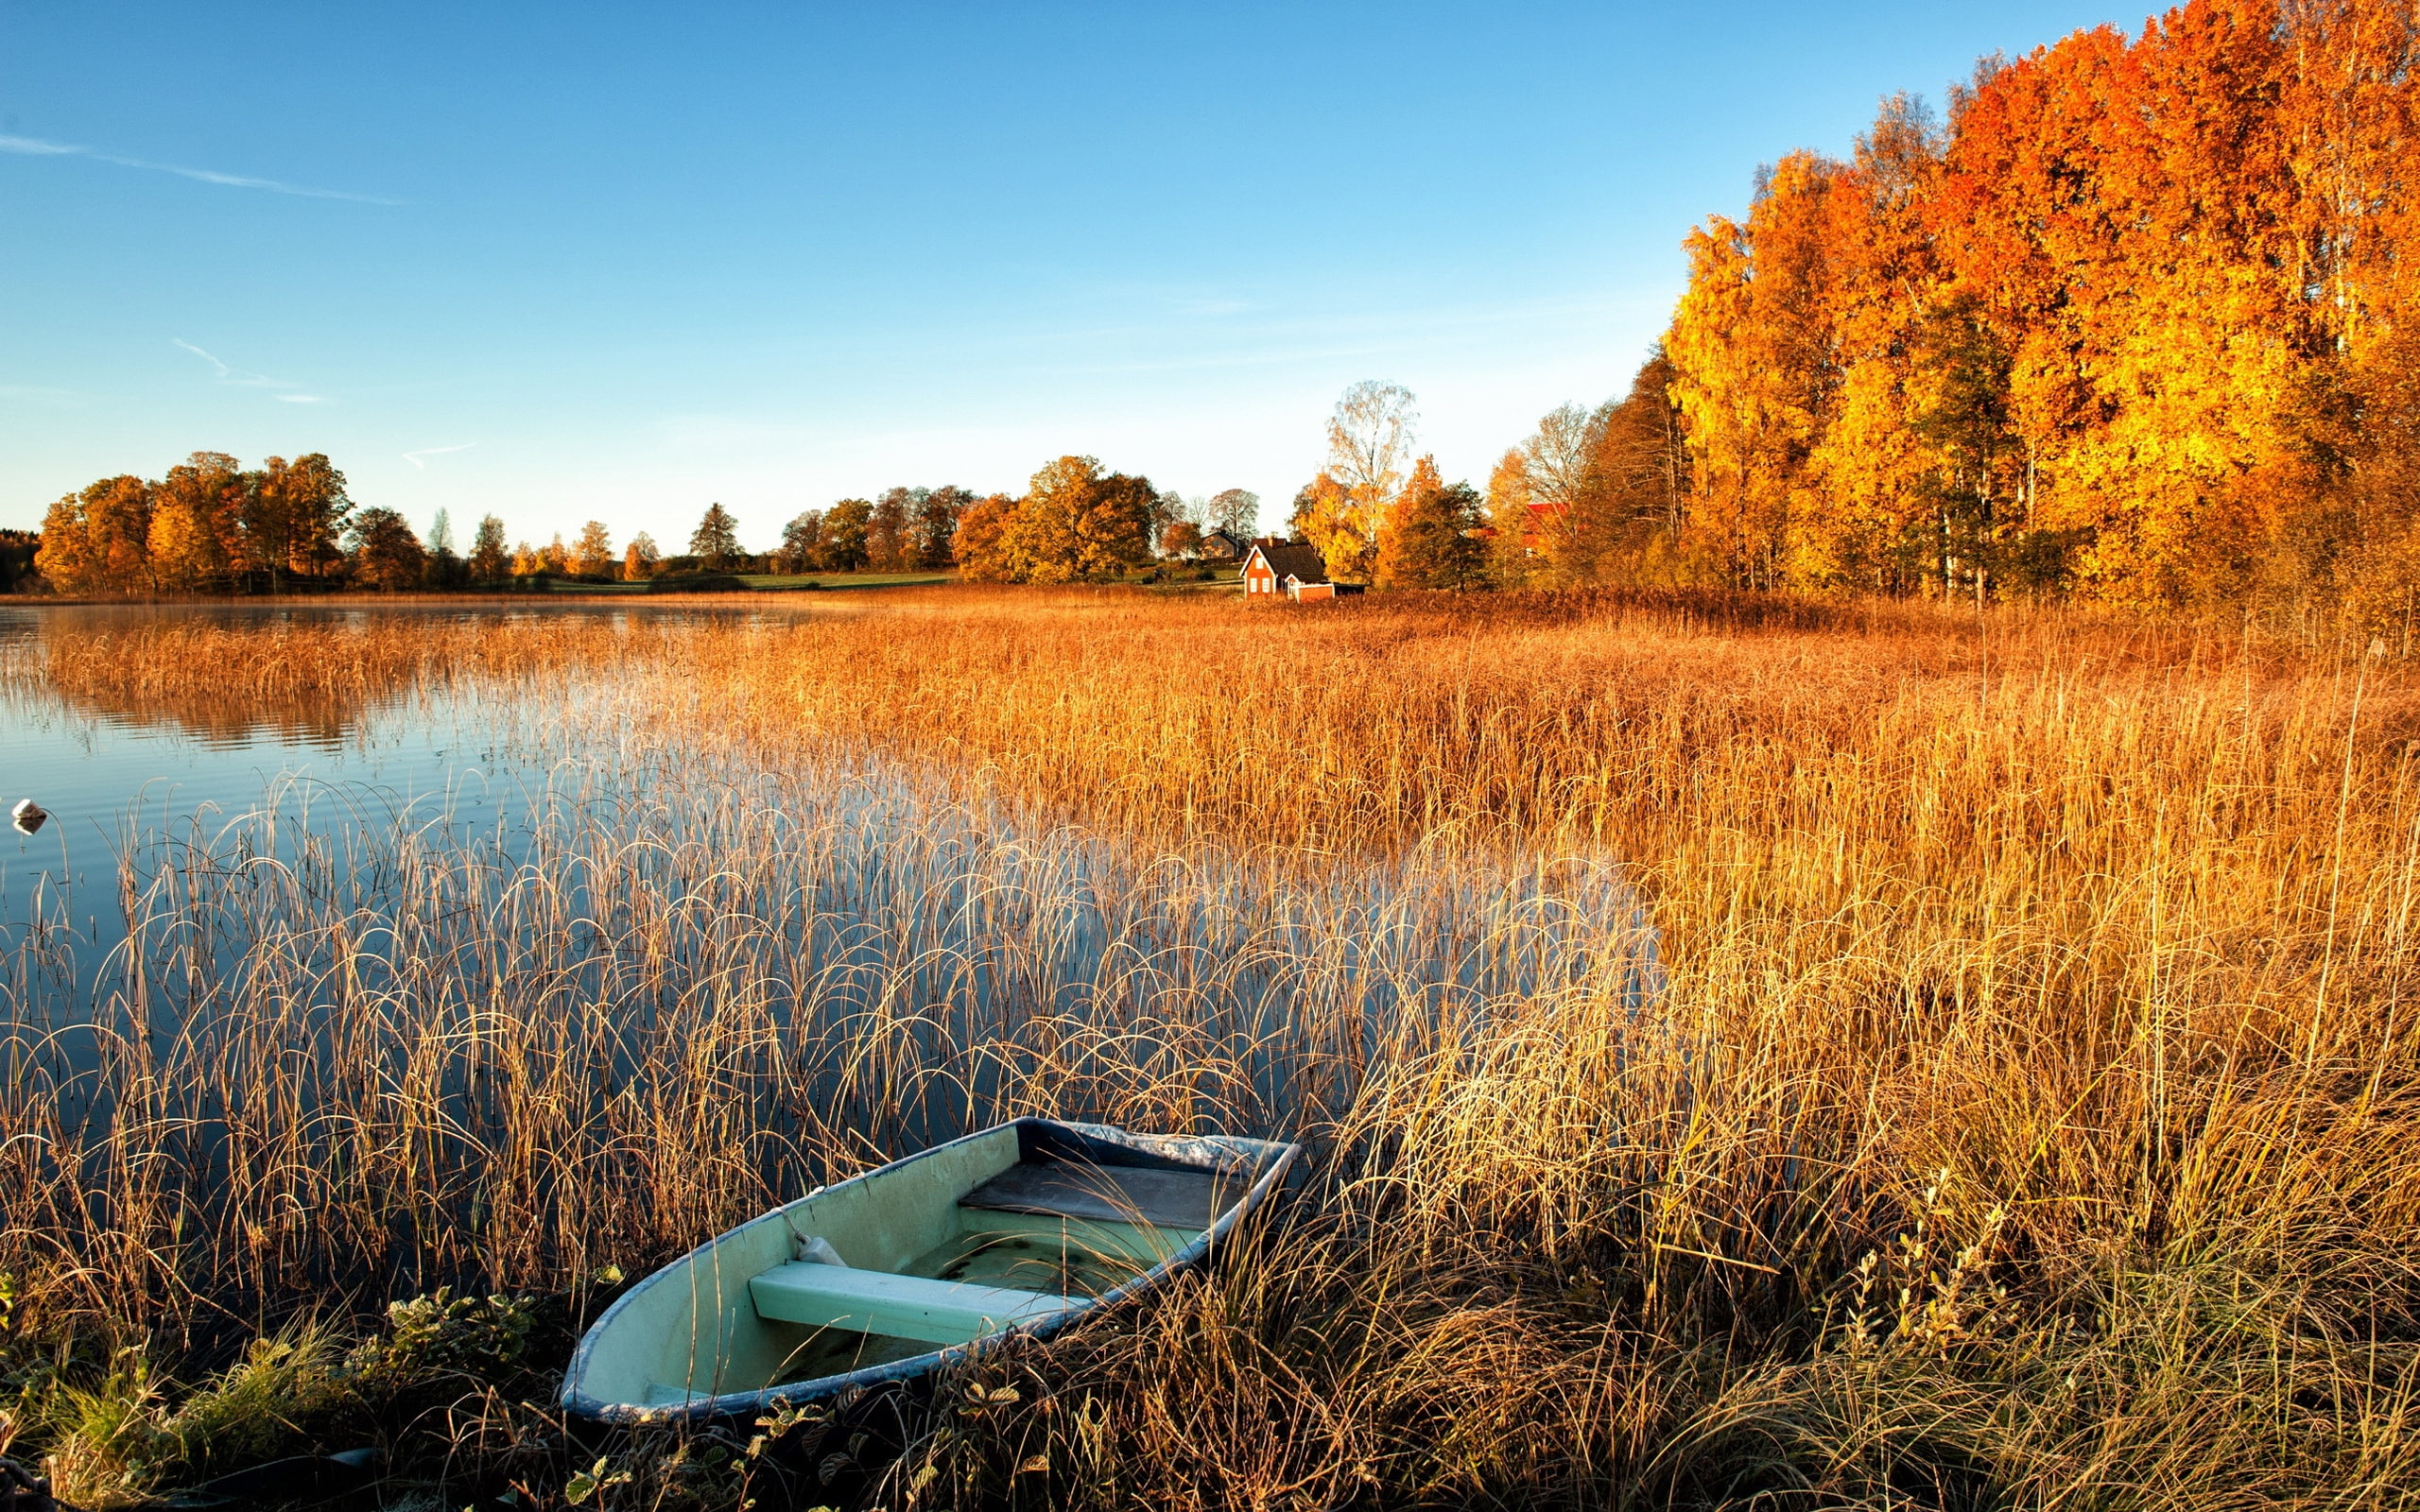 Autumn scenery, lake, water grass, boat, trees, house